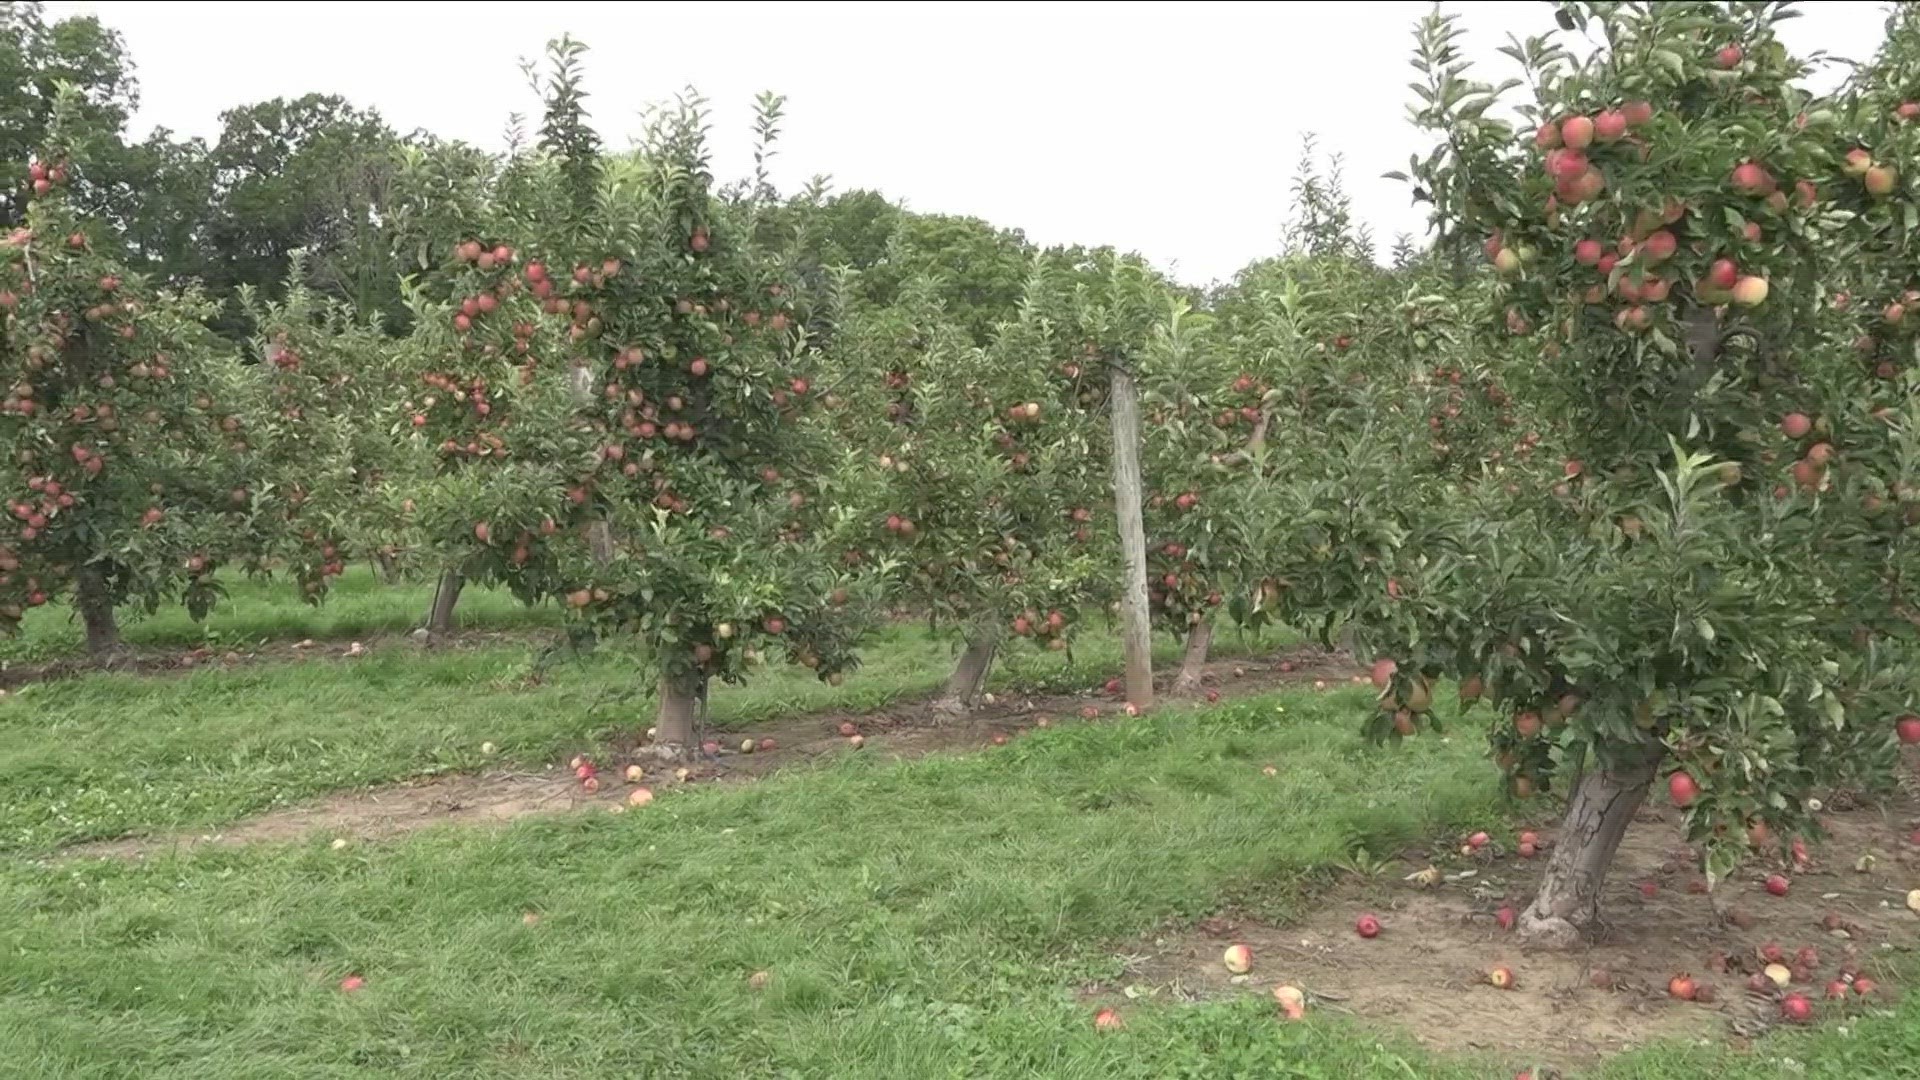 Frost and freezing temps in late April and early May aren't a new phenomenon for Empire State apple growers, but this year it came later than usual.